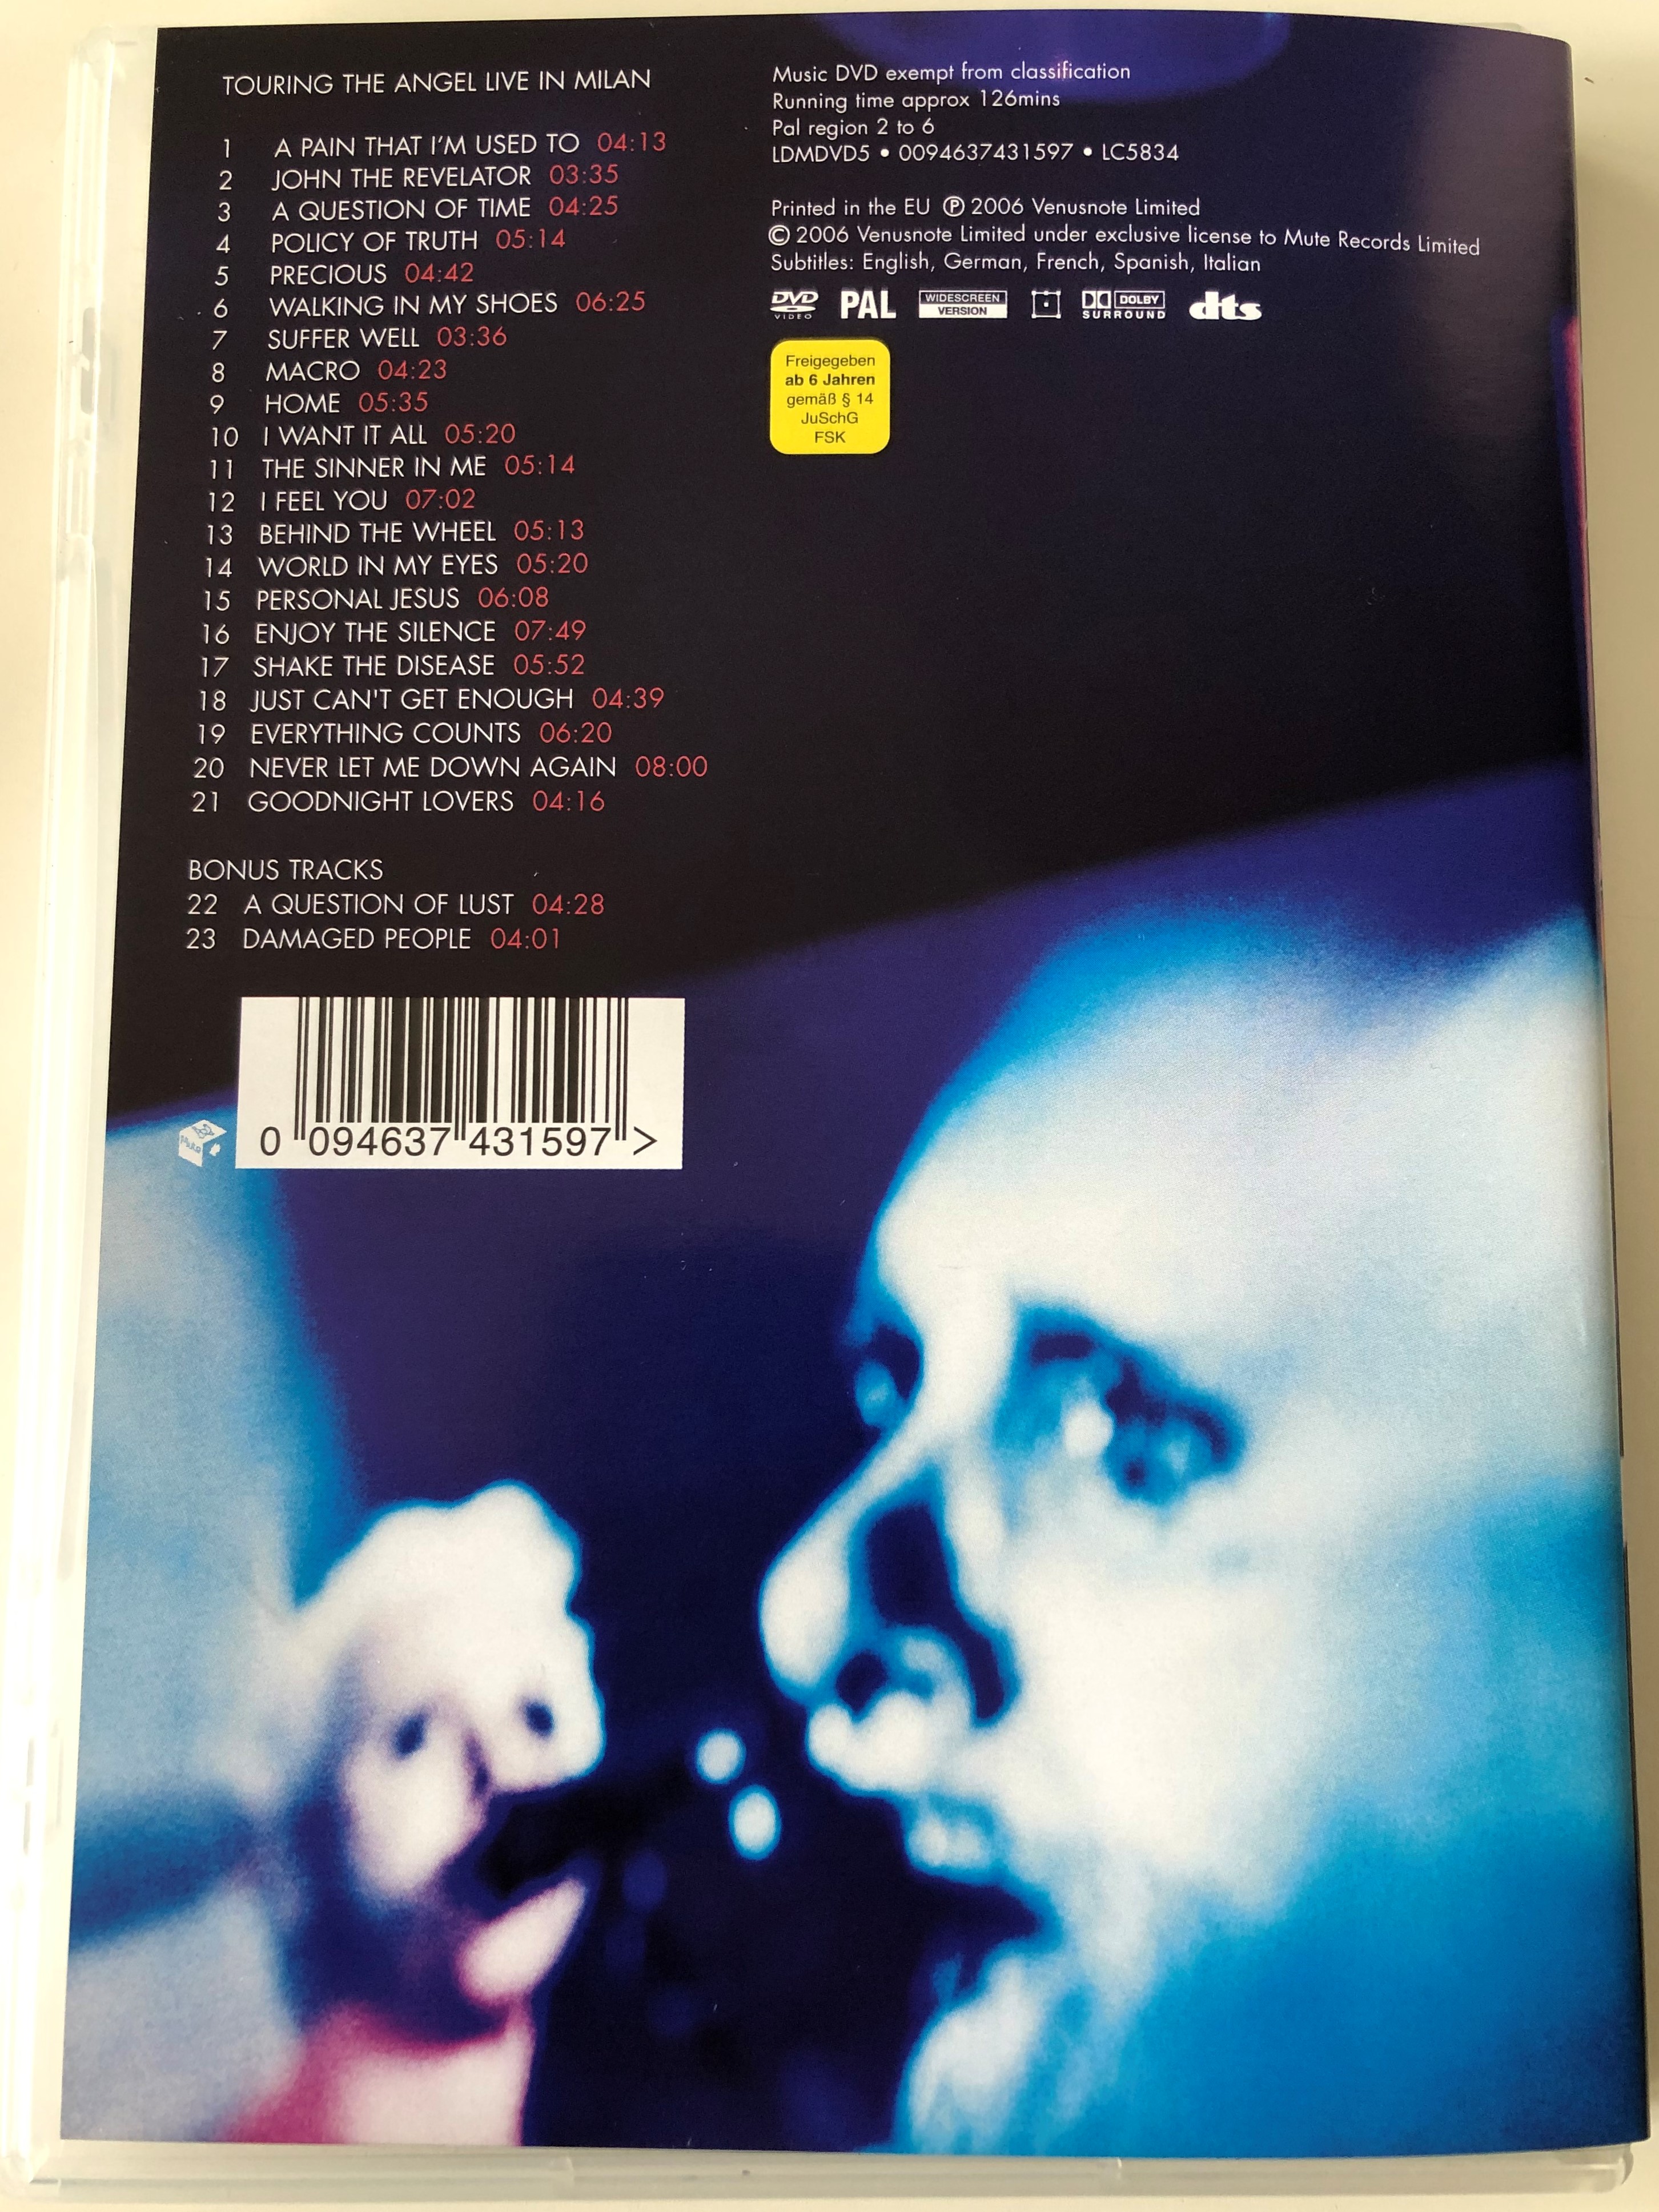 Depeche Mode - Touring the angel DVD 2006 Live in Milan / Suffer well,  Precious, I feel you, Enjoy the silence / LDMDVD5 / Venus note Limited -  bibleinmylanguage